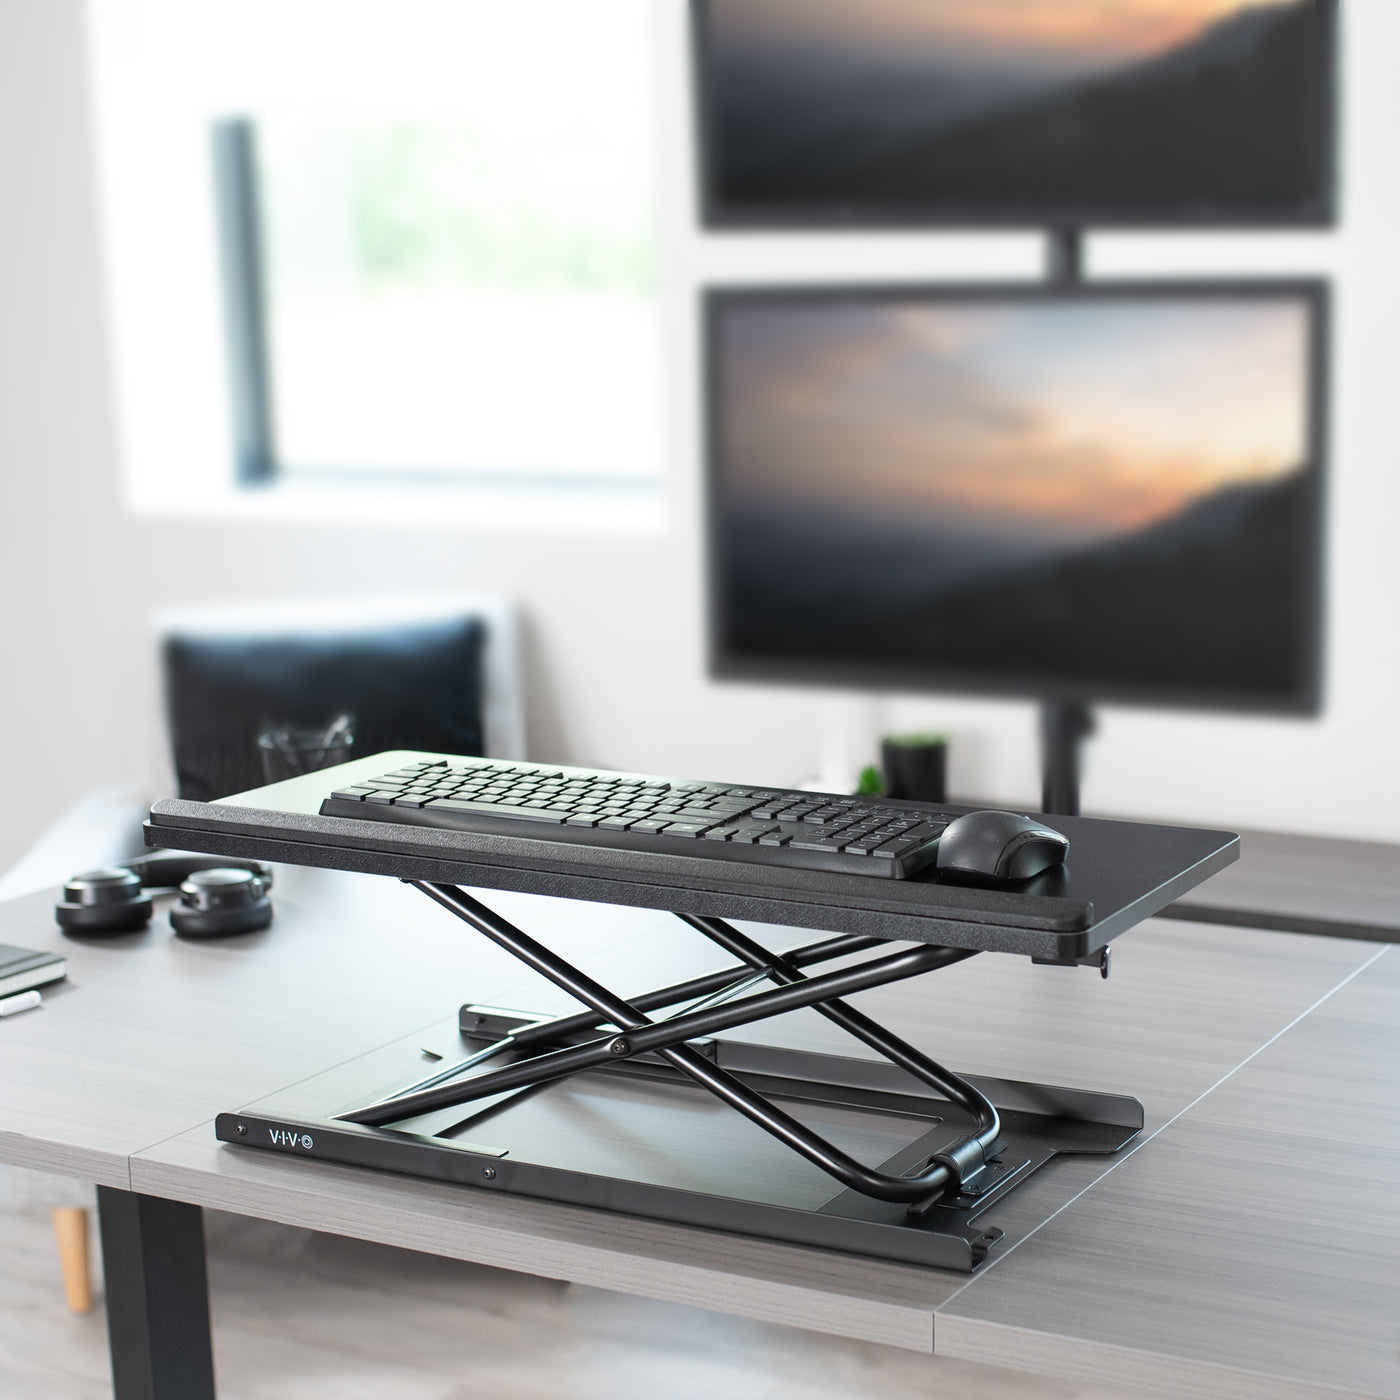 Transform your workspace with this height-adjustable keyboard riser from VIVO.